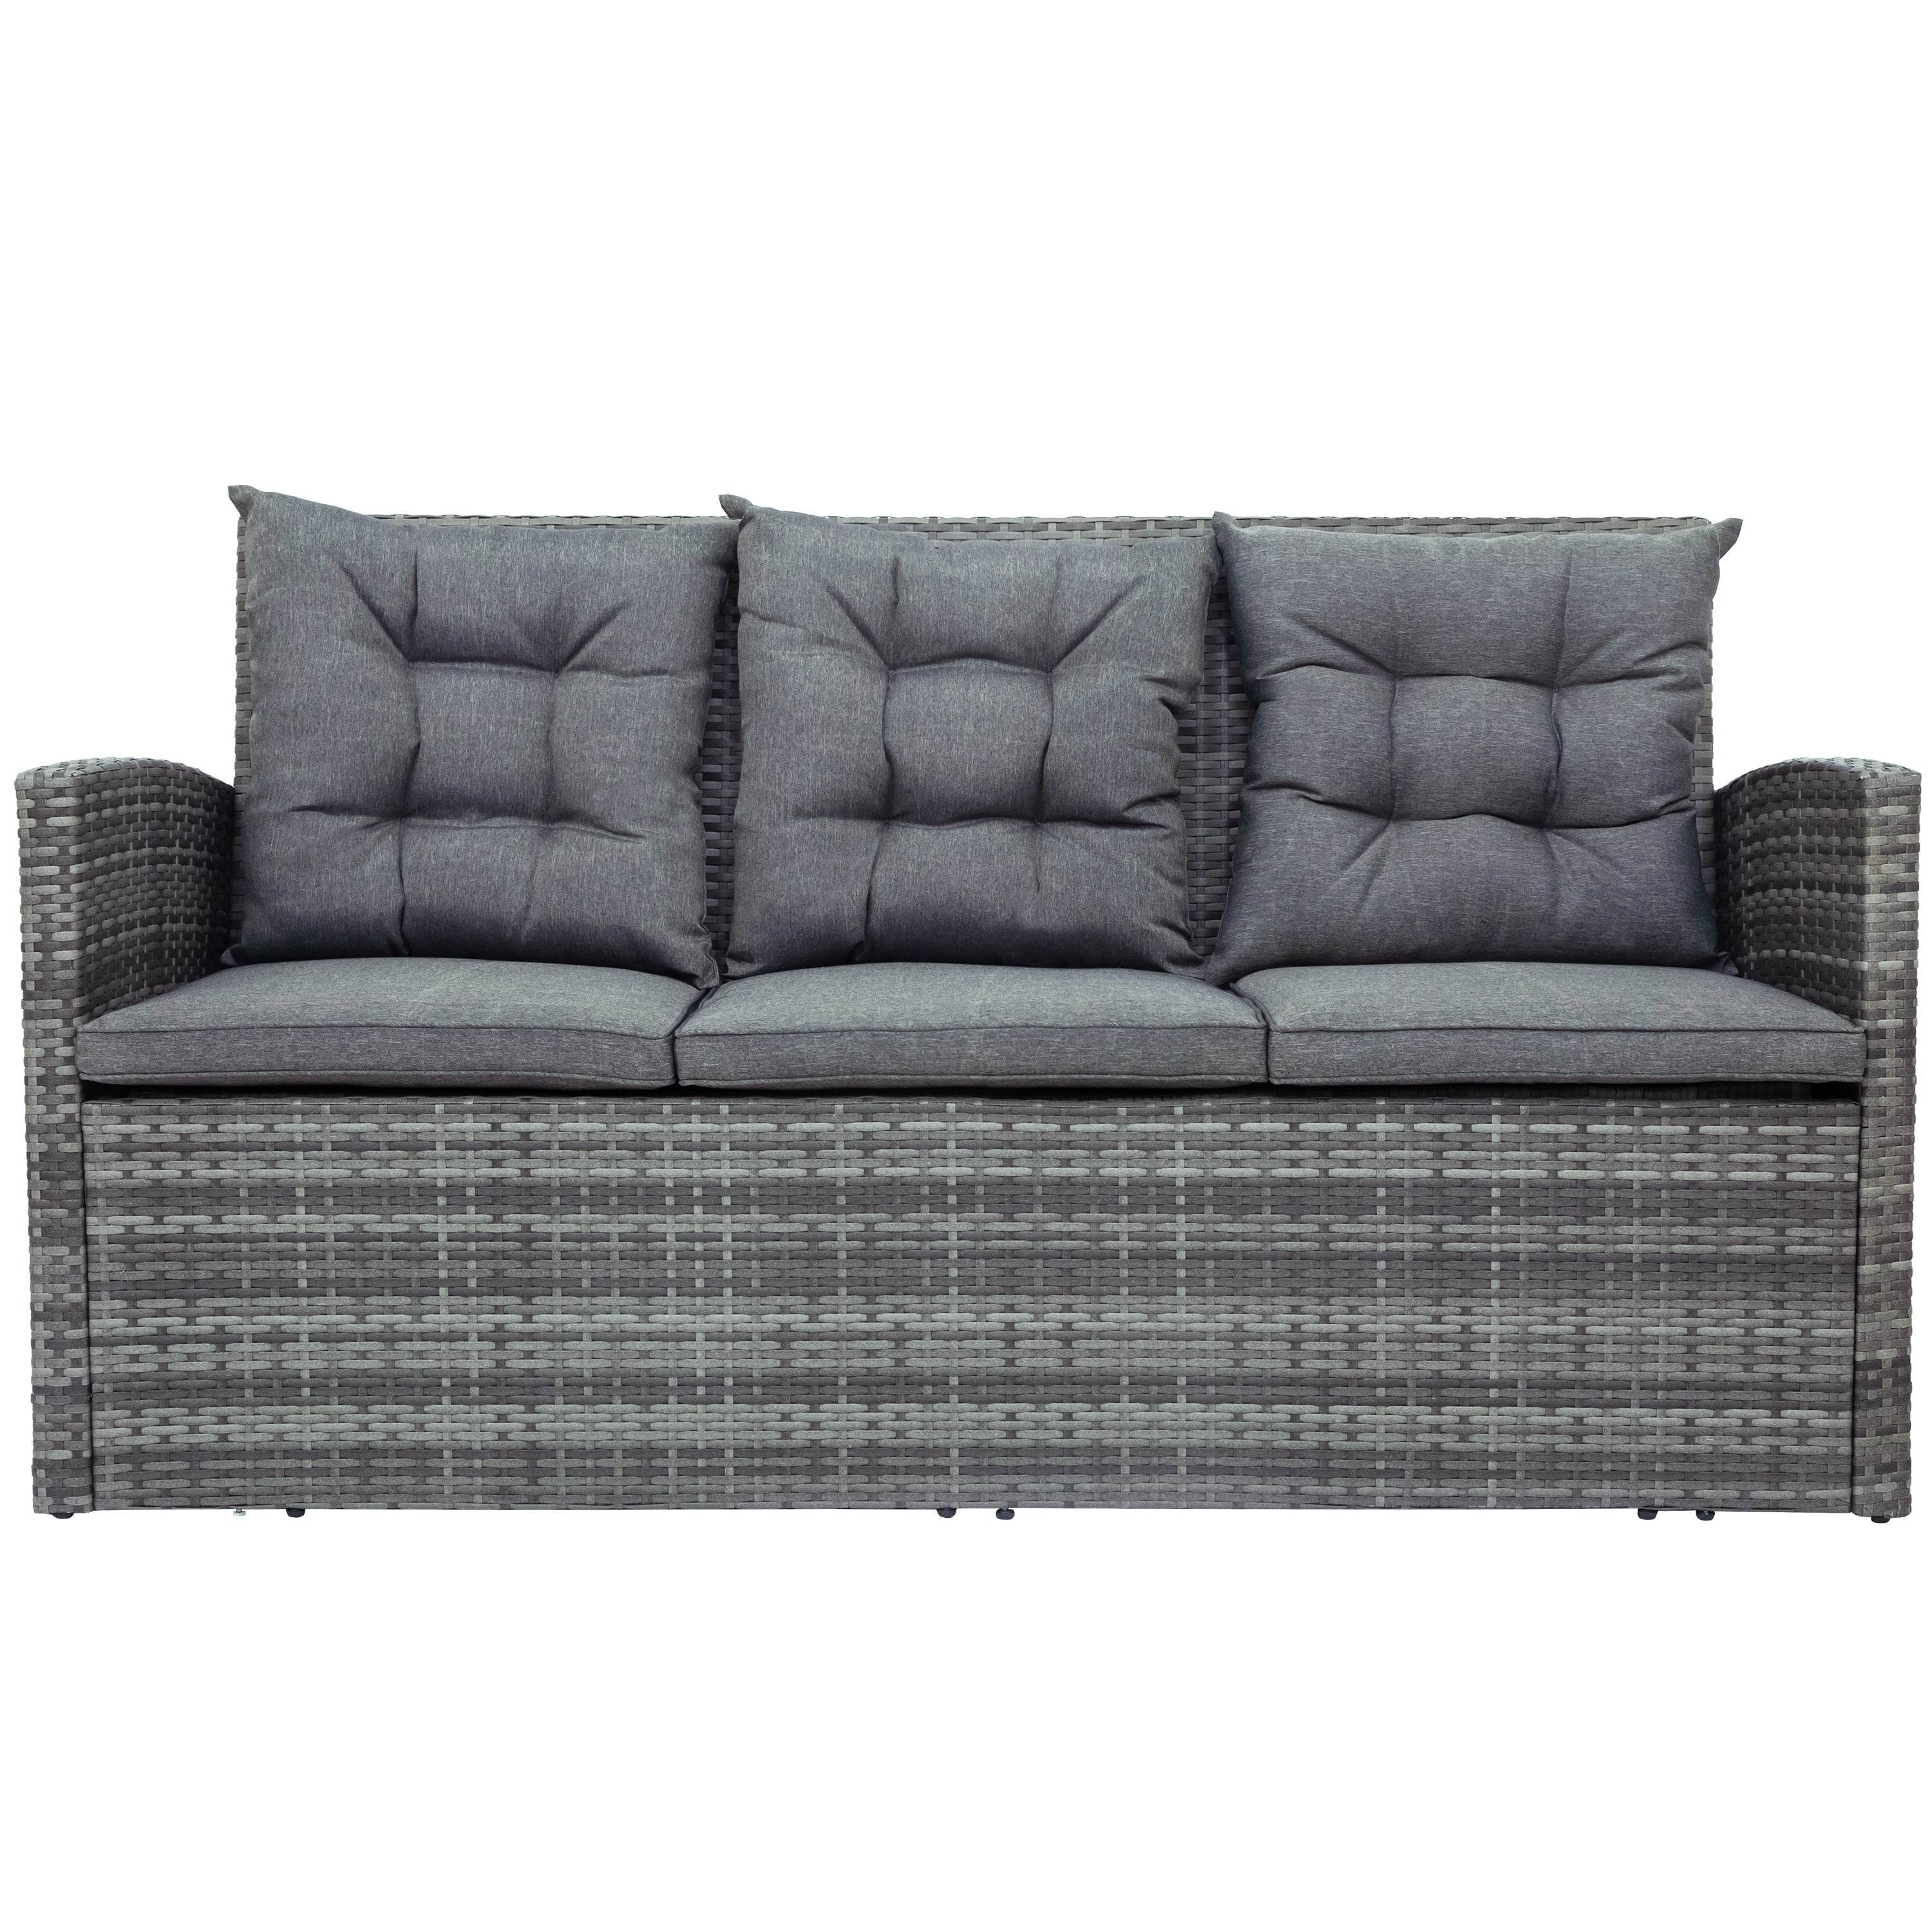 5-piece Outdoor UV-Resistant Sofa Set with Storage Bench, Glass Table, Gray